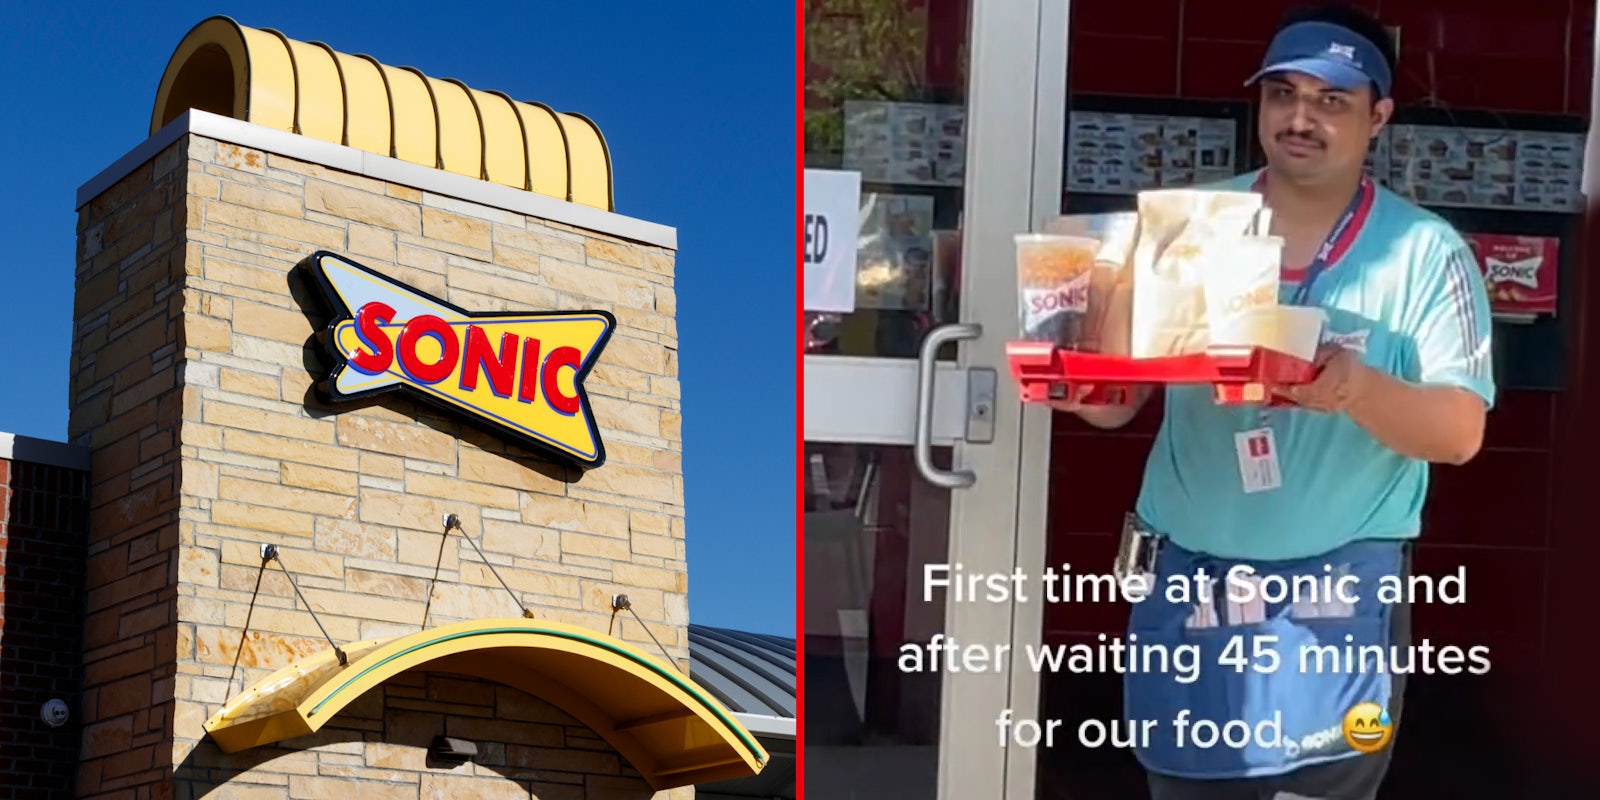 Sonic Fast Food building with sign blue sky background (l) Sonic worker holding tray of food walking out door caption 'First time at Sonic and after waiting 45 minutes for our food' (r)